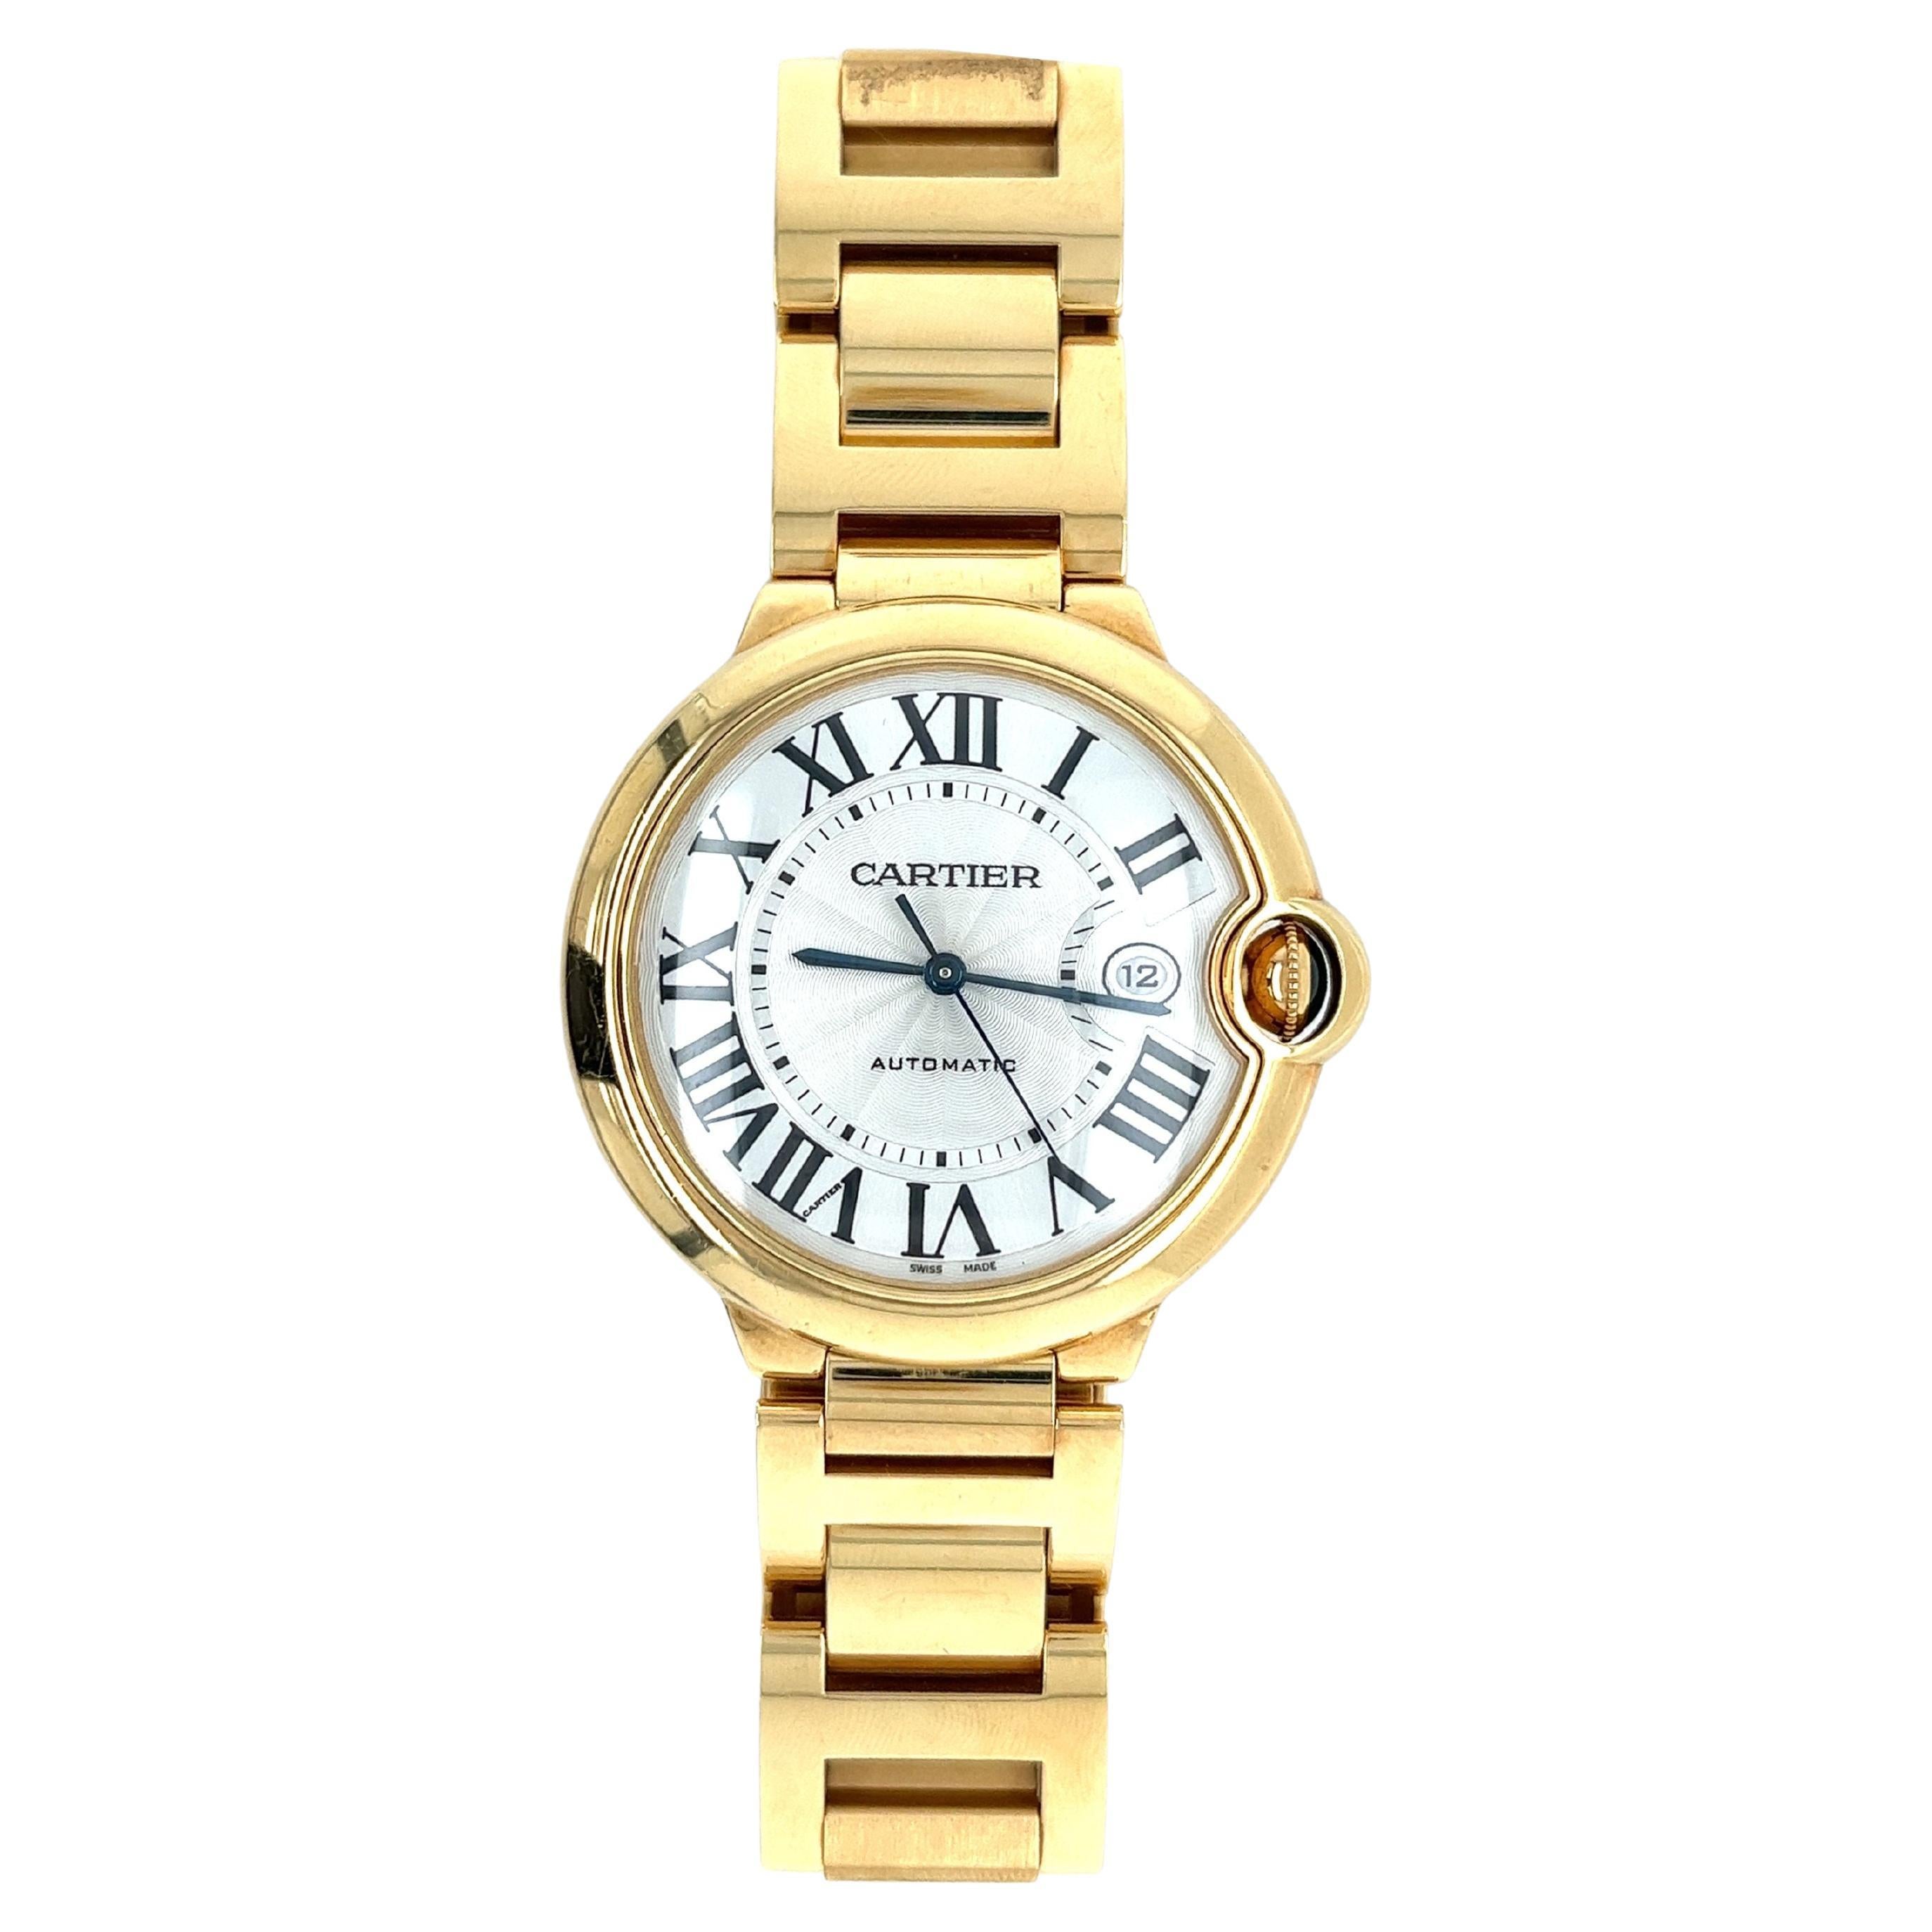 Cartier Ballon Bleu Jumbo Large Size Mens Watch in 18k Gold with Box/Papers